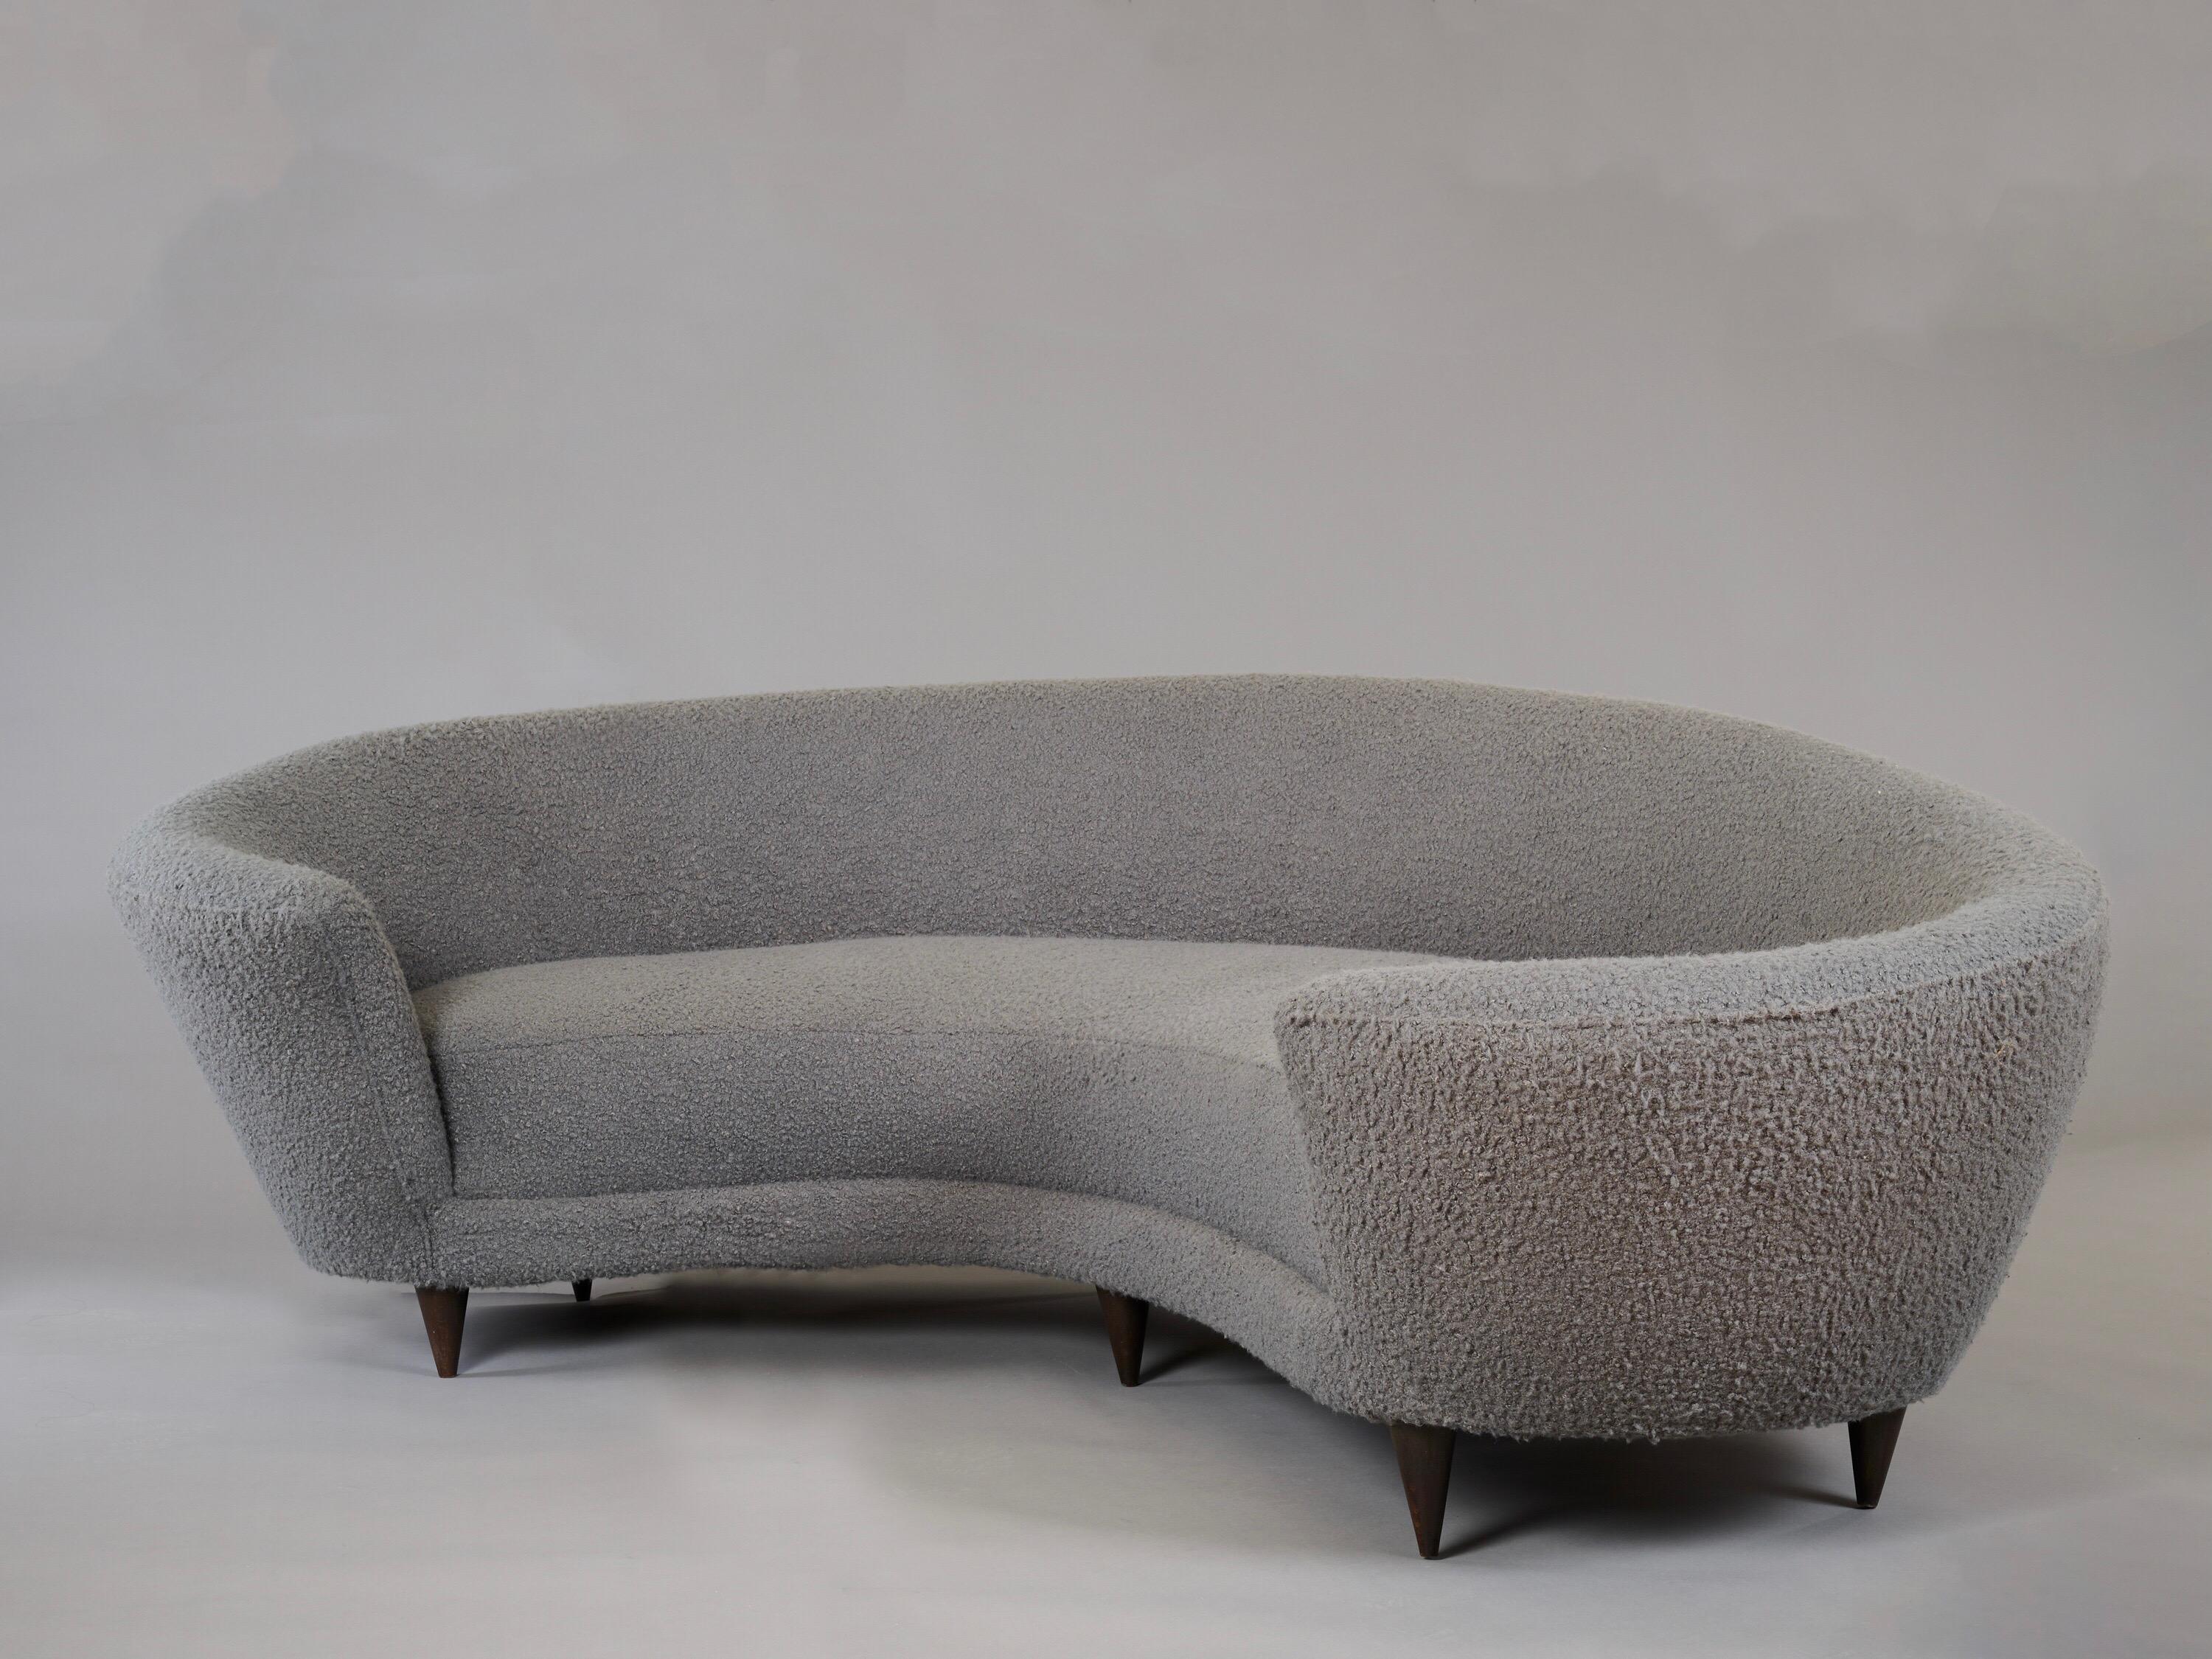 Fabric Federico Munari Large Curved Sofa in Dove Grey Boucle, Italy 1960's